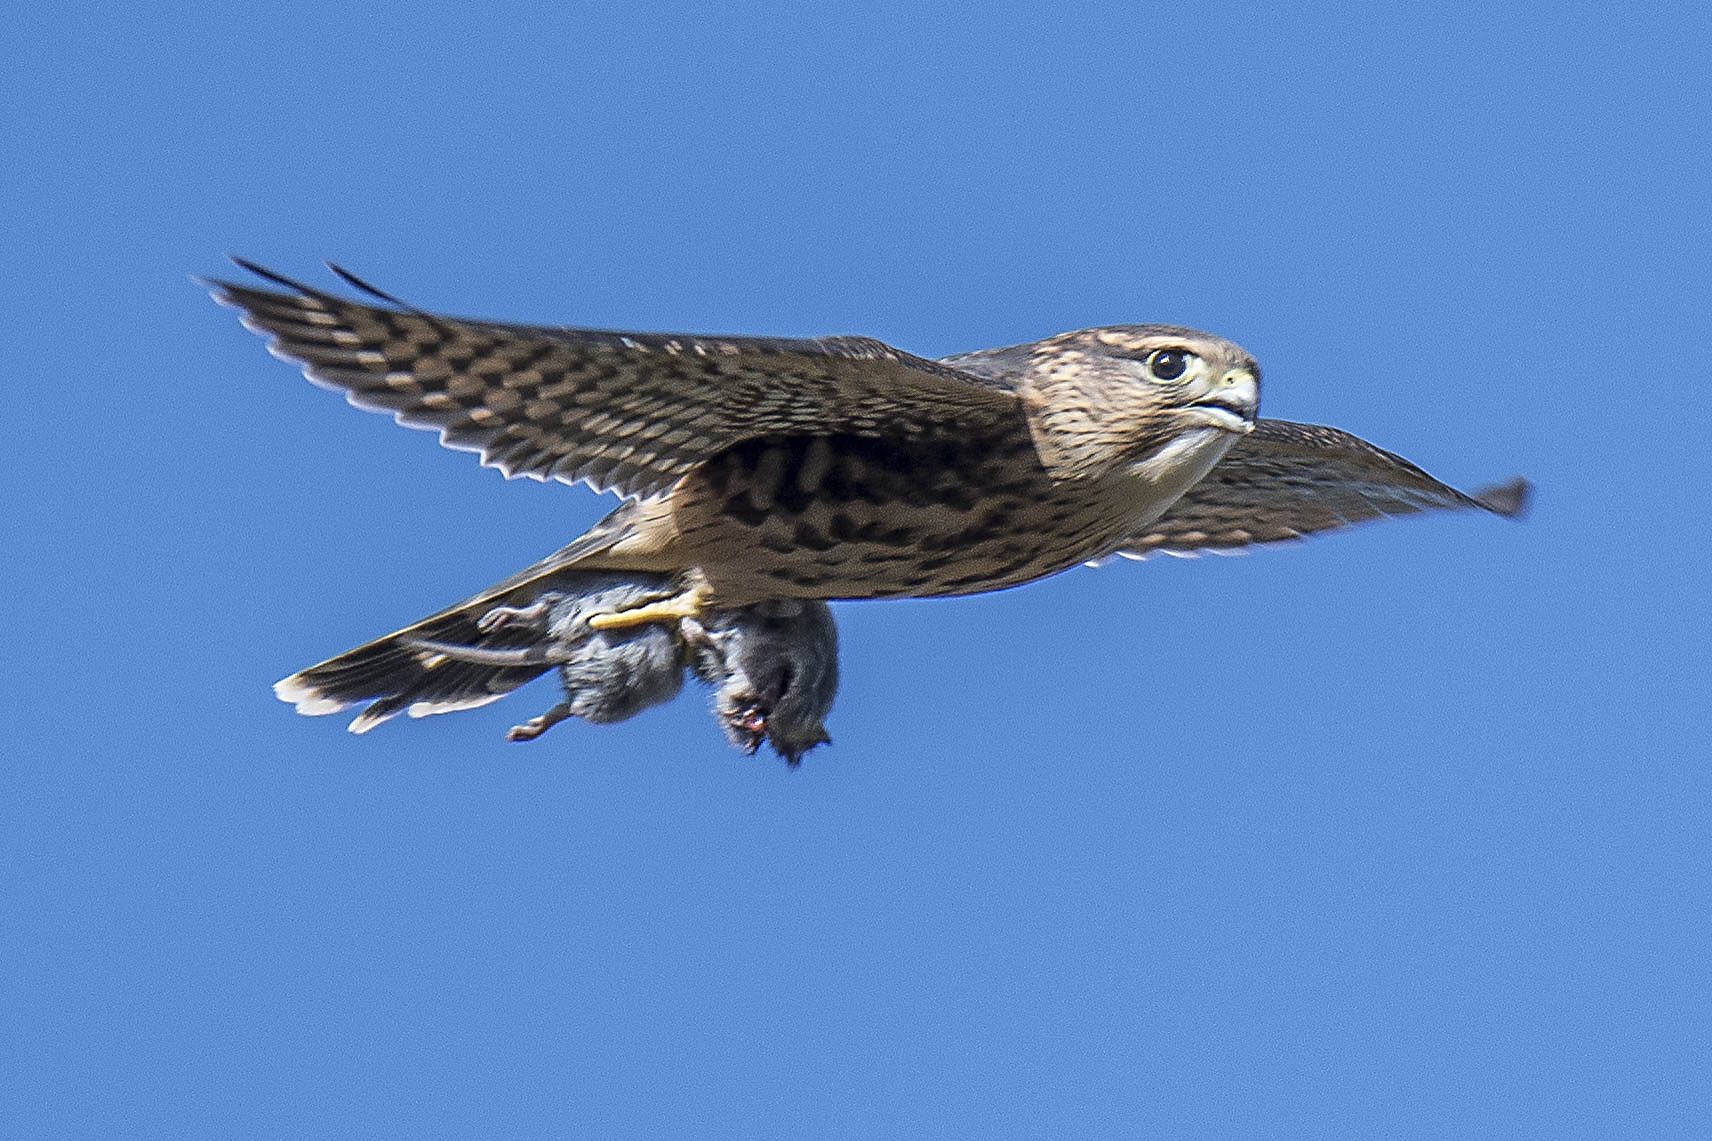 a merlin in flight against a blue sky carrying a rodent in its claws